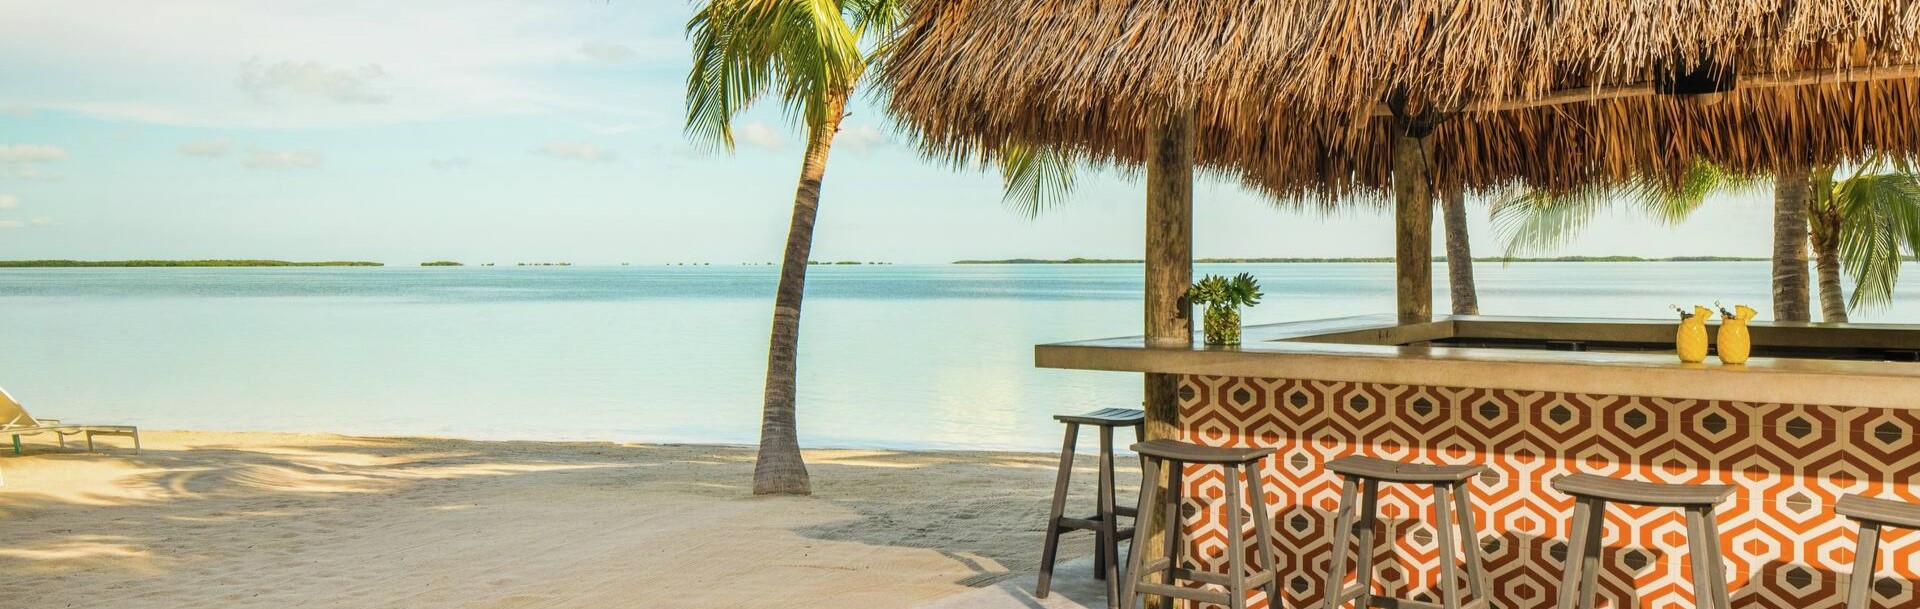 Bakers Cay Resort Key Largo Curio Collection by Hilton